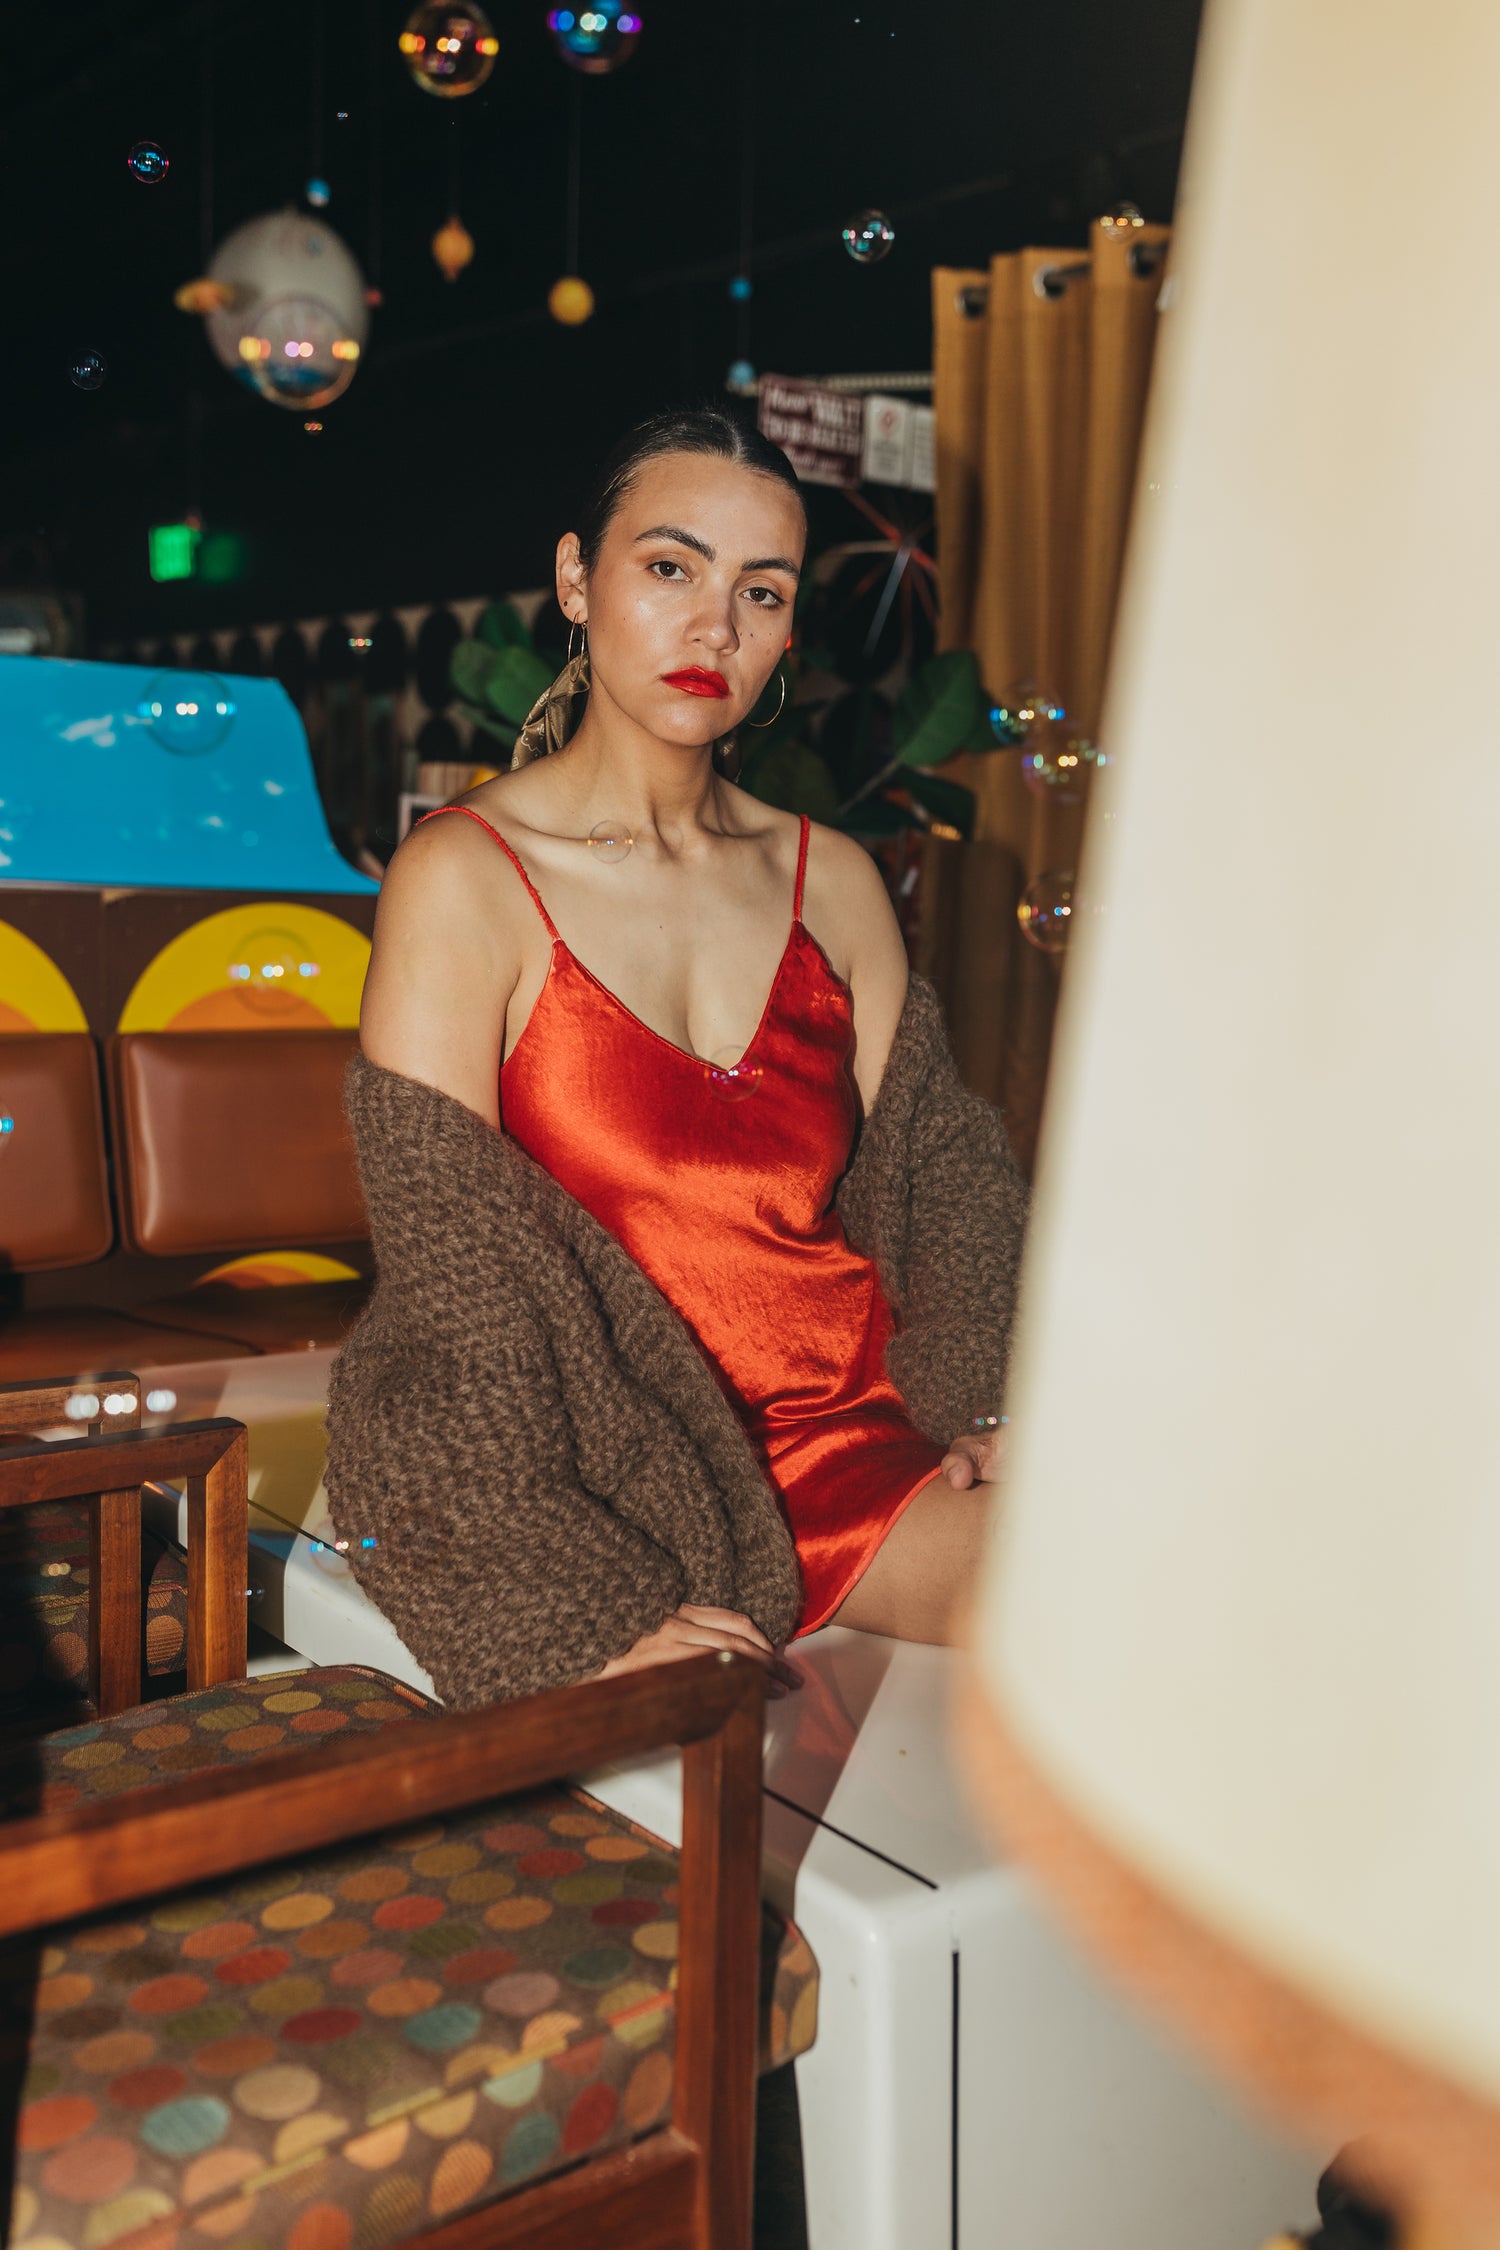 phoebe is a latina woman wearing the danielle dean little red dress under an oversized brown lulua cardigan by nia thomas. she is sitting on a white table with bubbles and chaos around her.